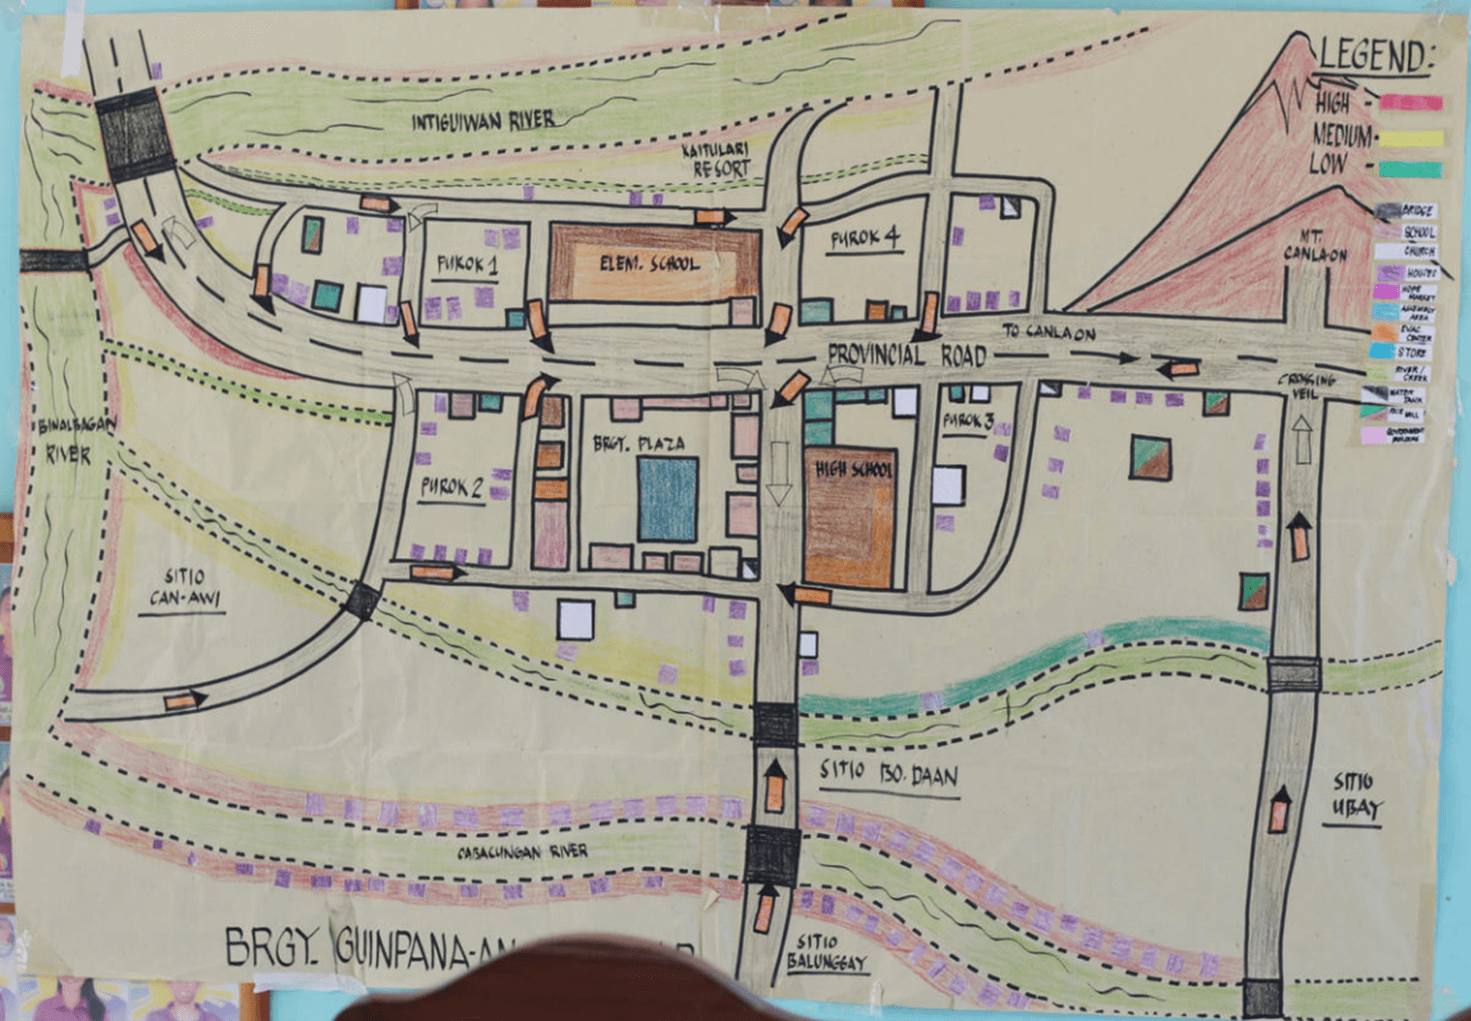 A colourful, hand-drawn map shows a small community in the Philippines with a volcano at the top right. 